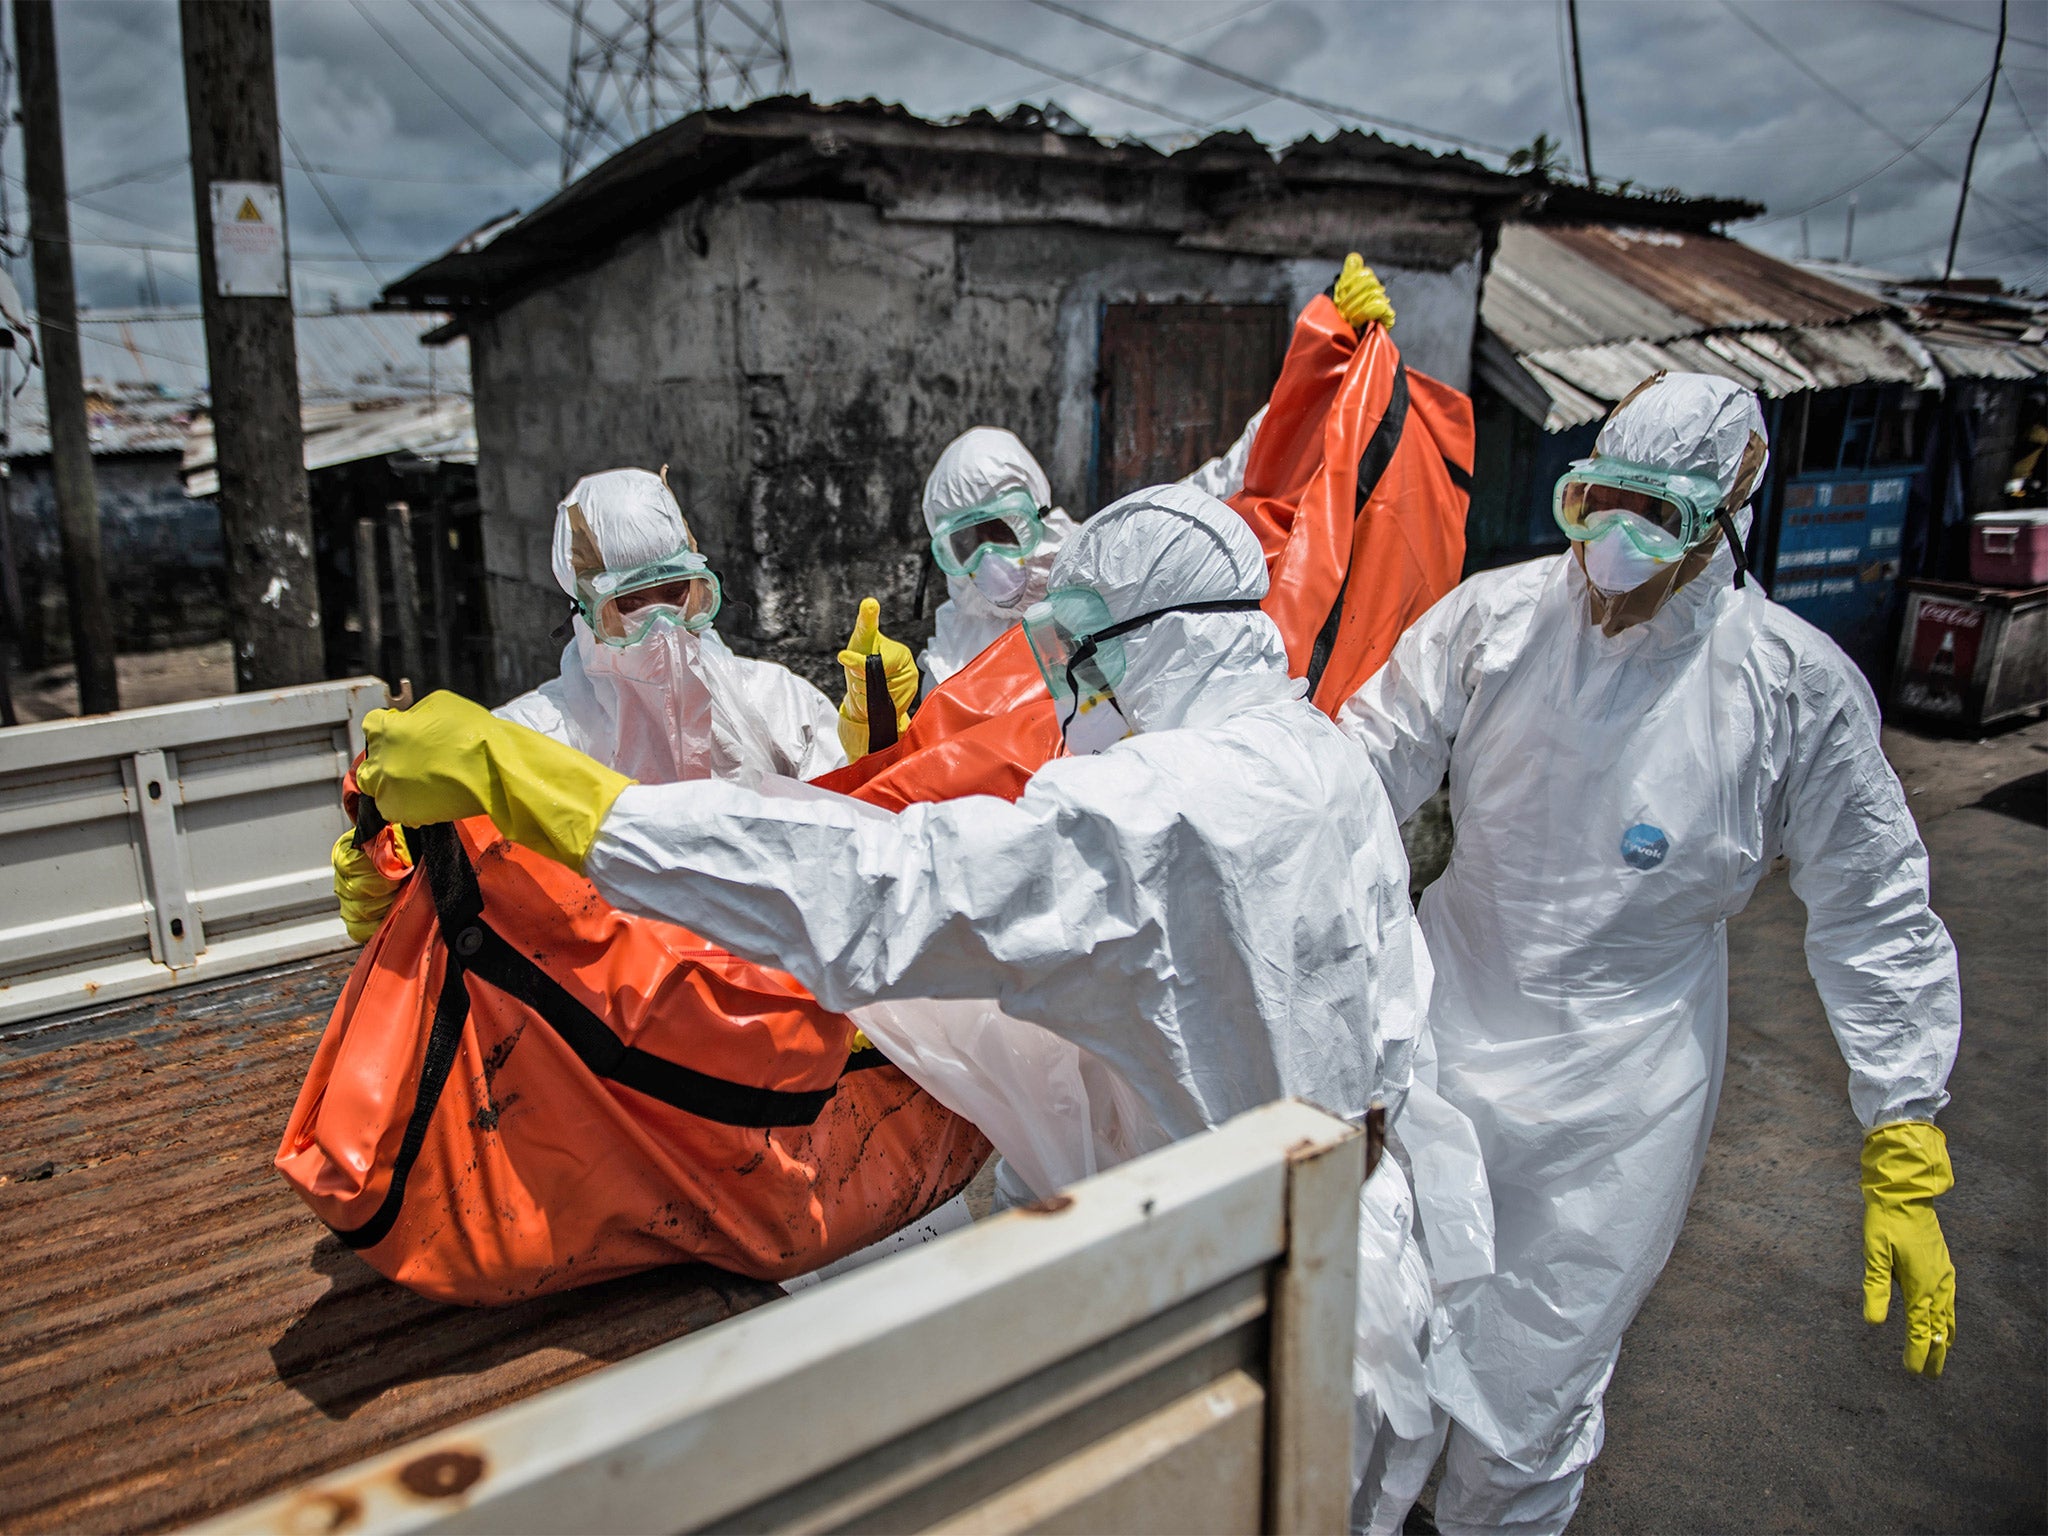 Red Cross members carry the body of an Ebola victim in Monrovia, Liberia, last year